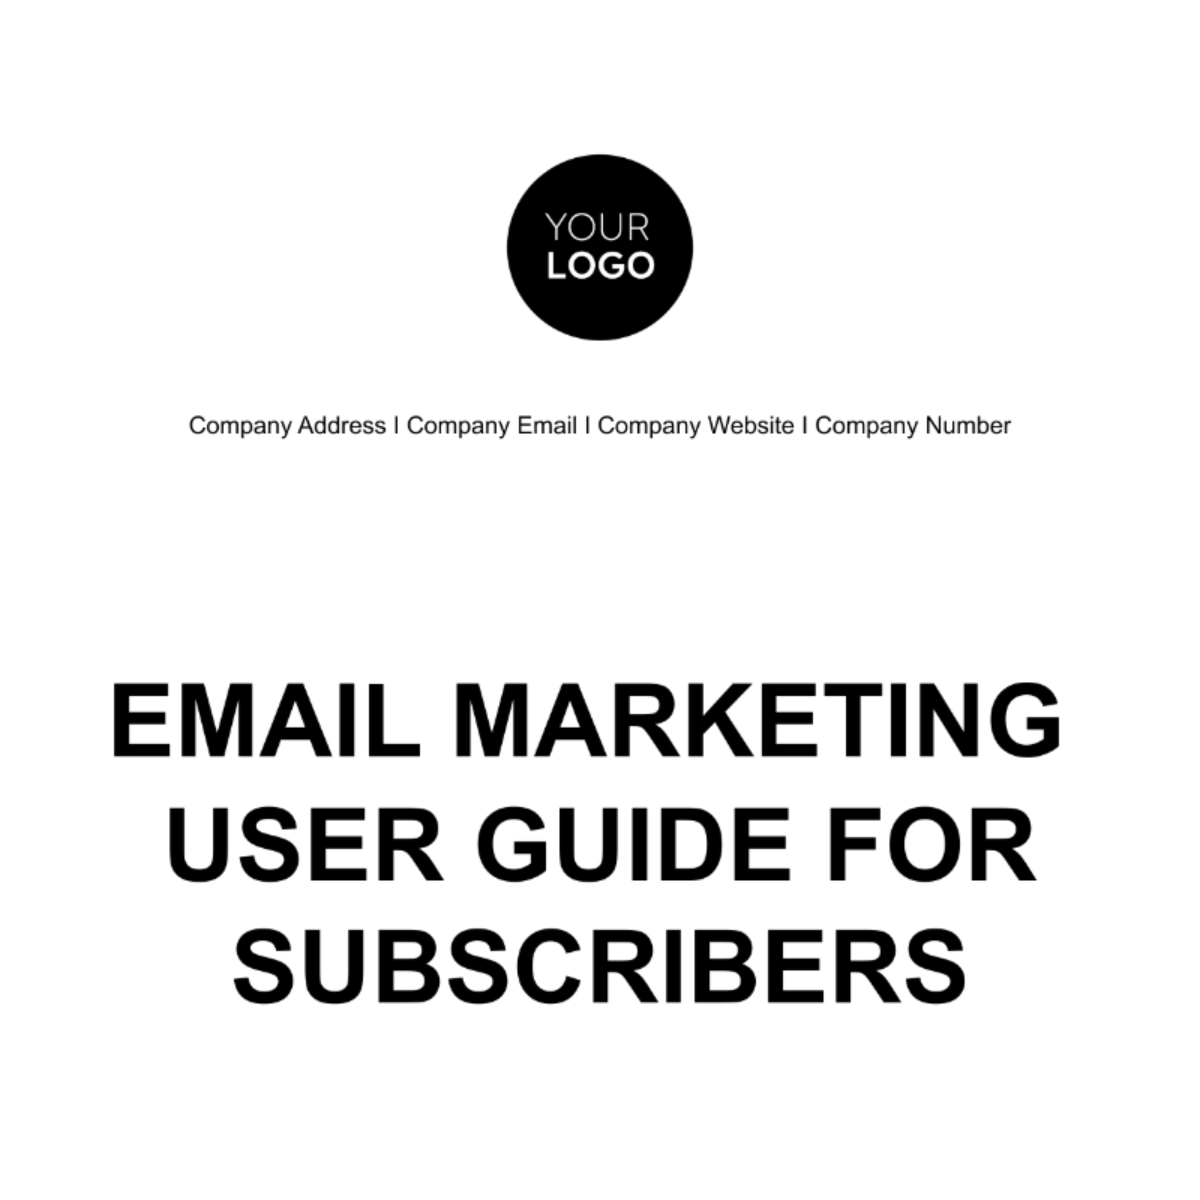 Free Email Marketing User Guide for Subscribers Template